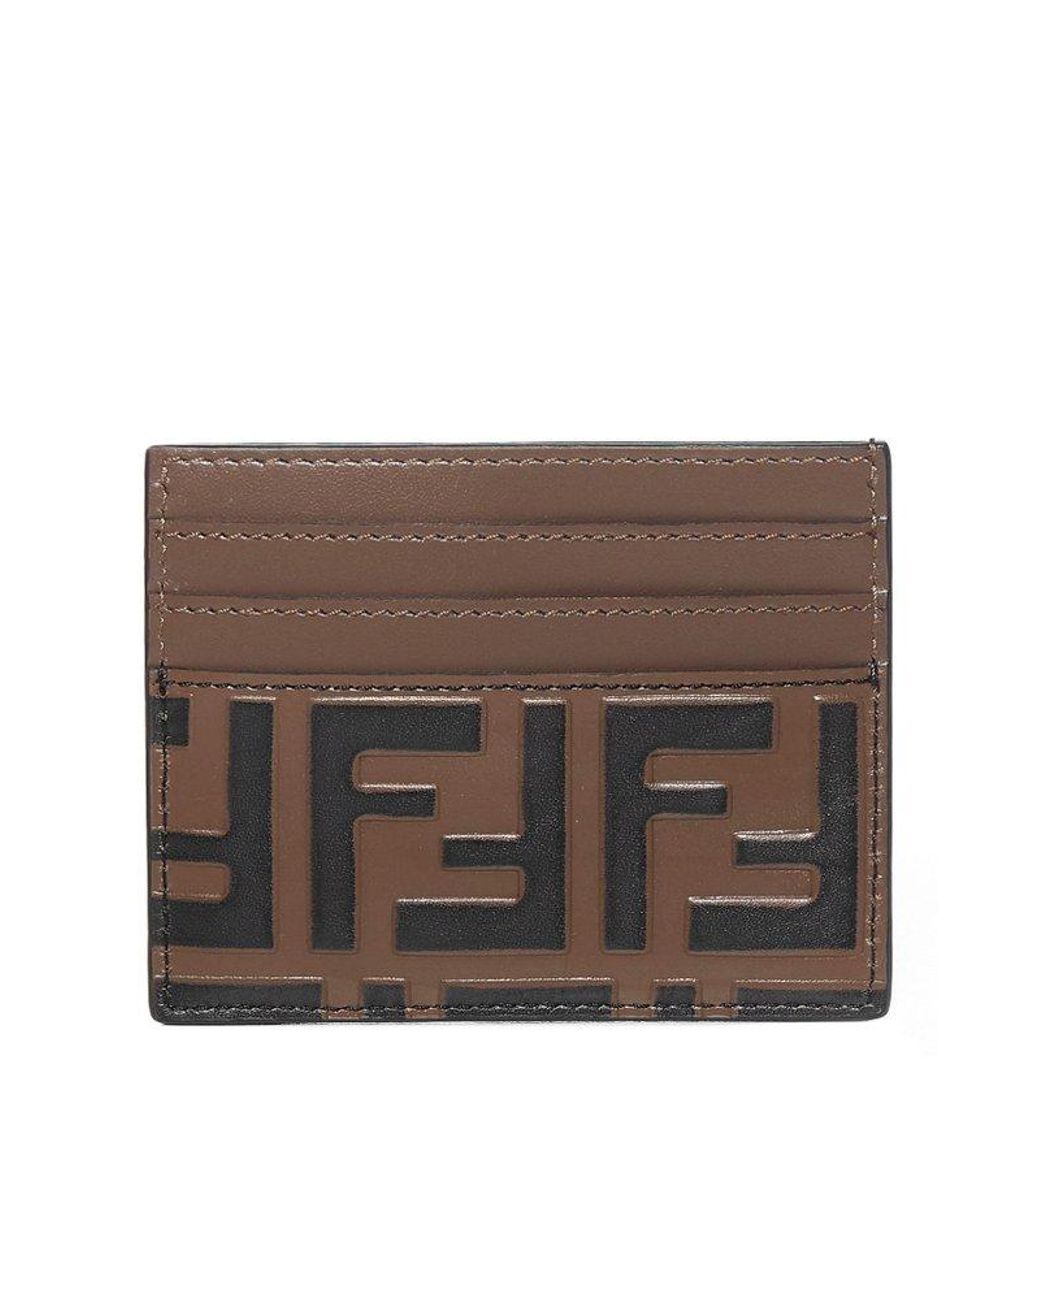 Fendi Ff Leather Card Holder in Brown | Lyst